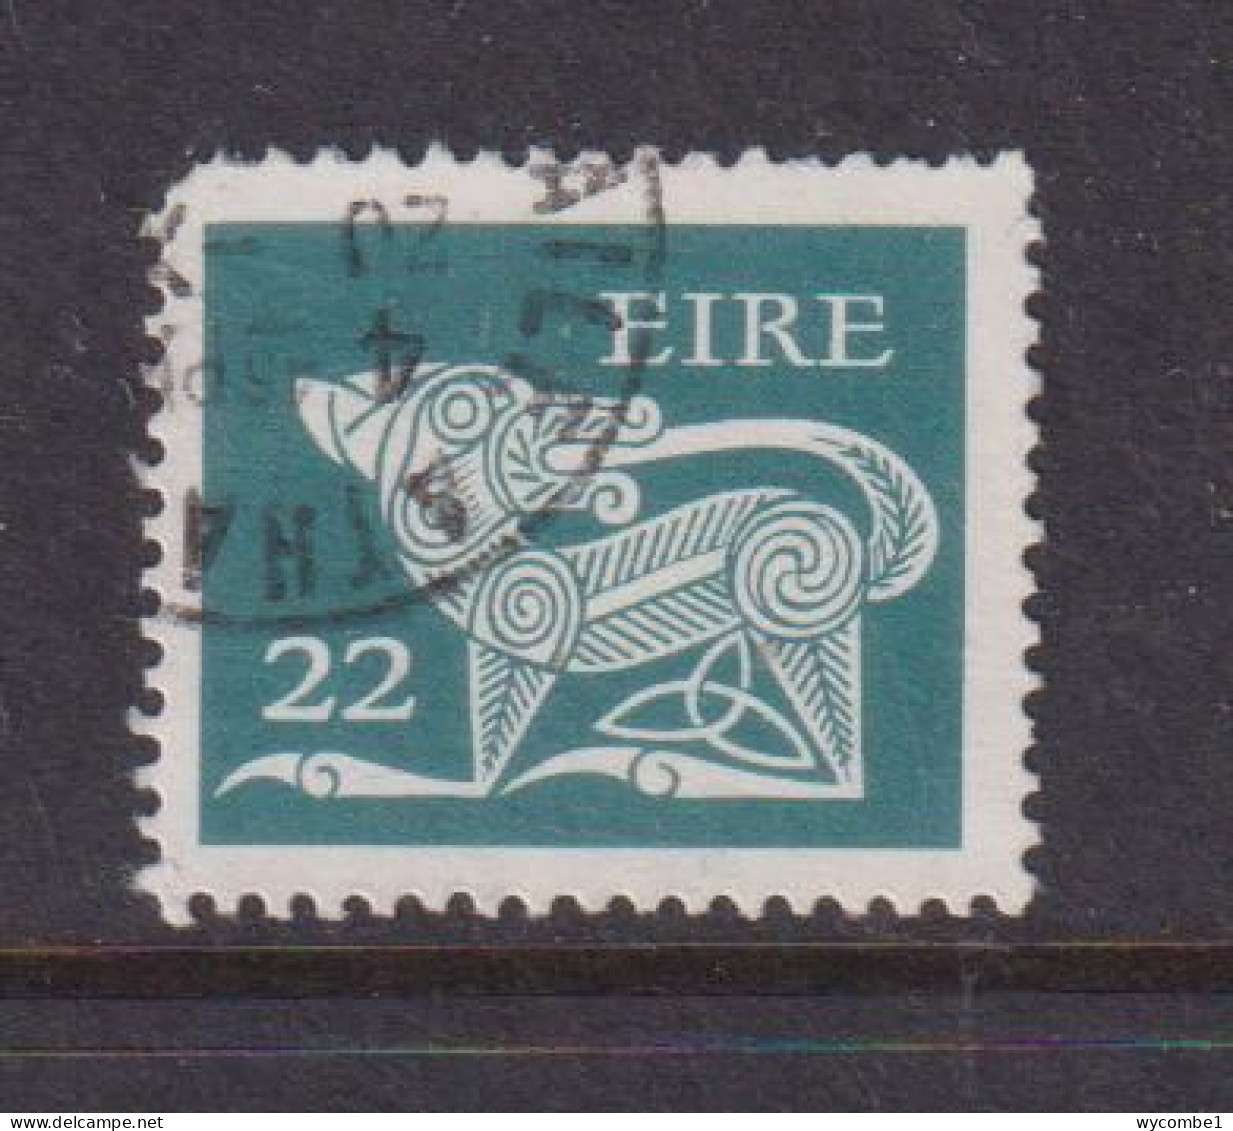 IRELAND - 1971  Decimal Currency Definitives 22p  Used As Scan - Usados